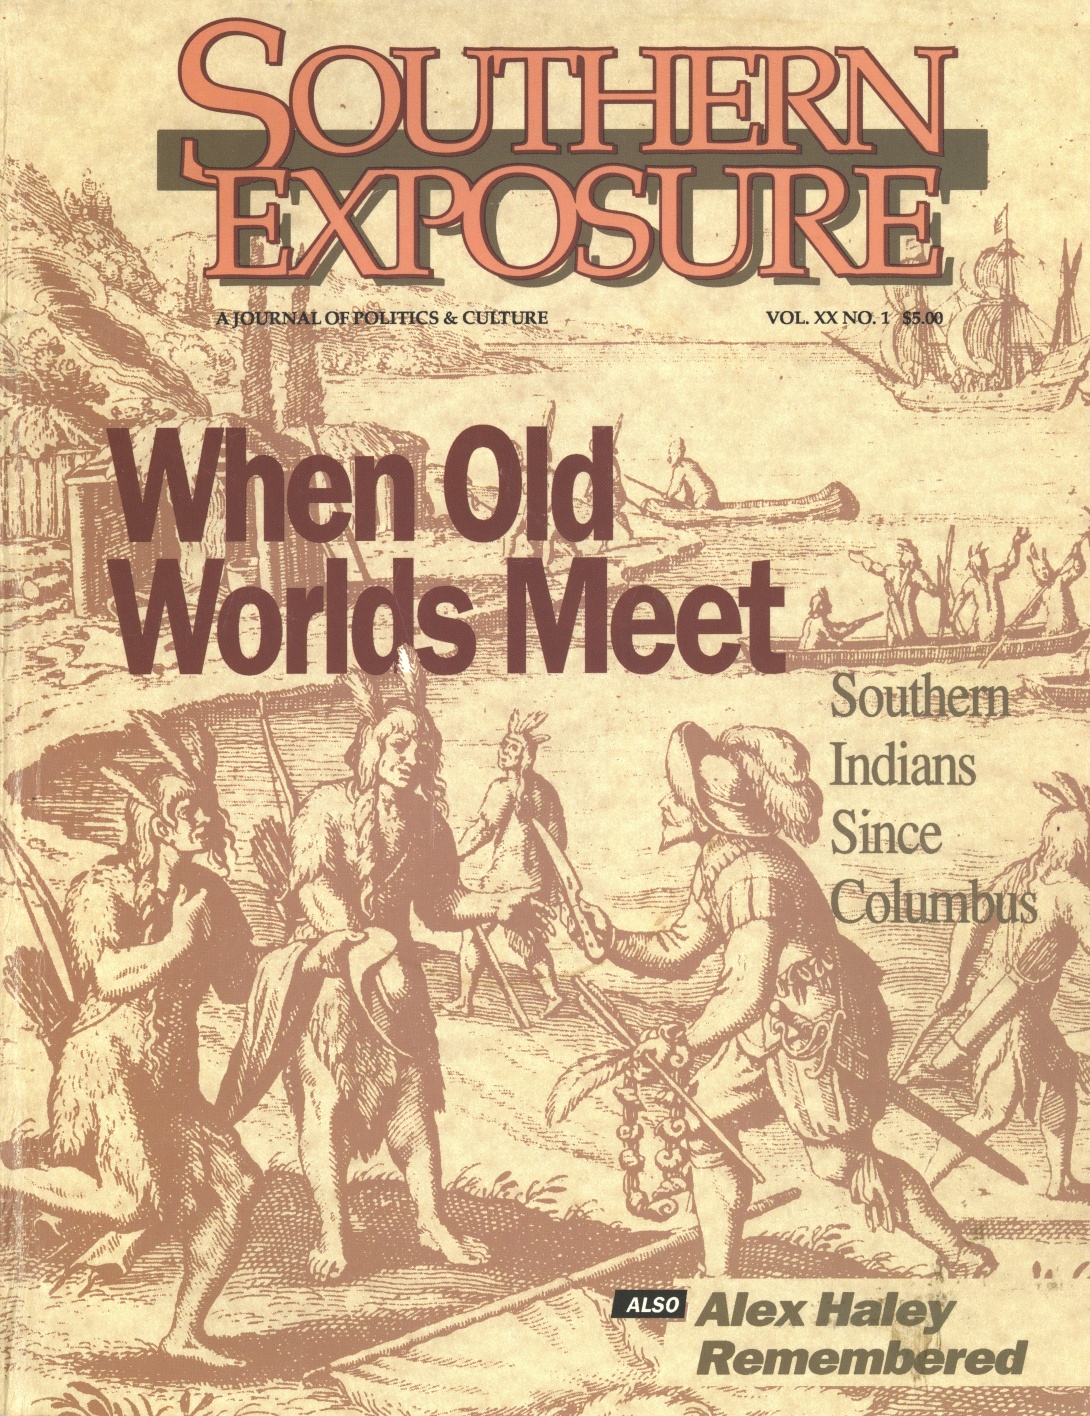 Magazine cover with drawing of settler meeting Indigenous persons, reading "When Old Worlds Meet: Southern Indians Since Columbus"